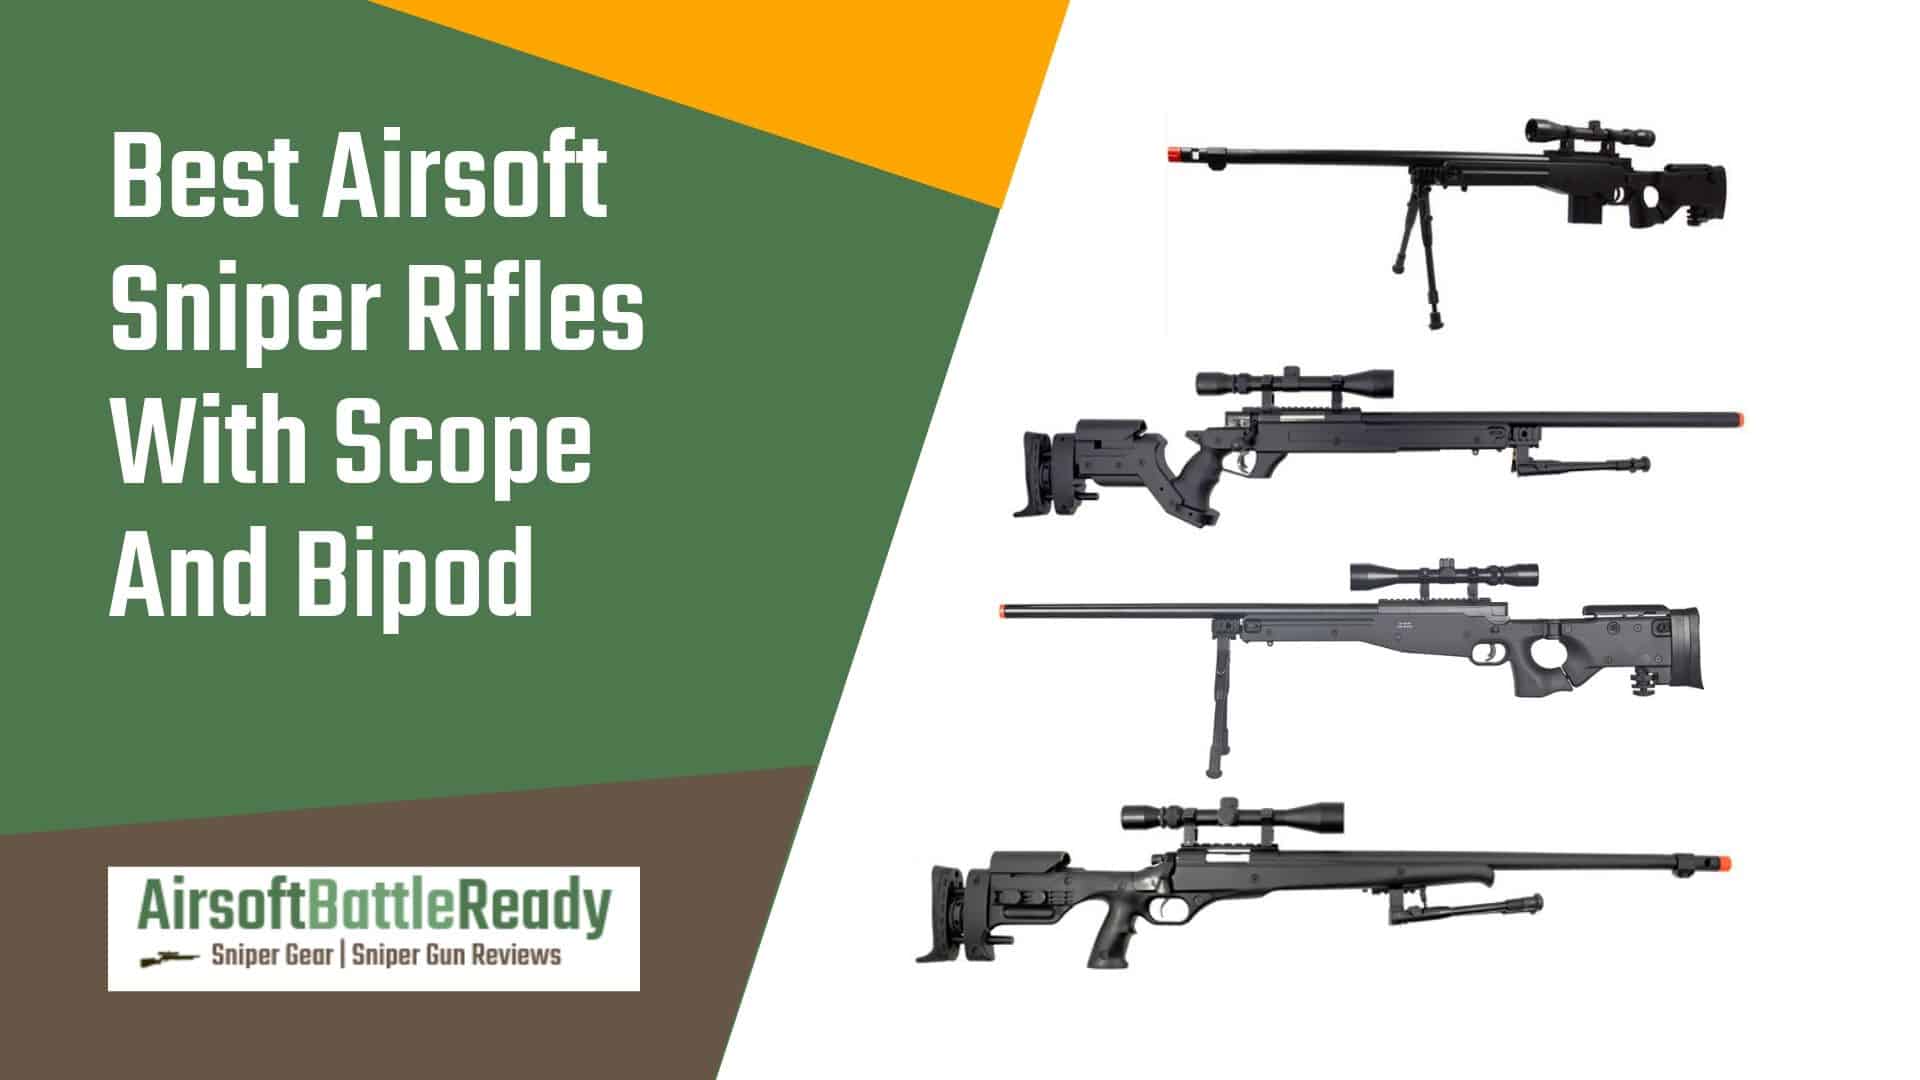 Best Airsoft Sniper Rifles With Scope And Bipod - Airsoft Battle Ready